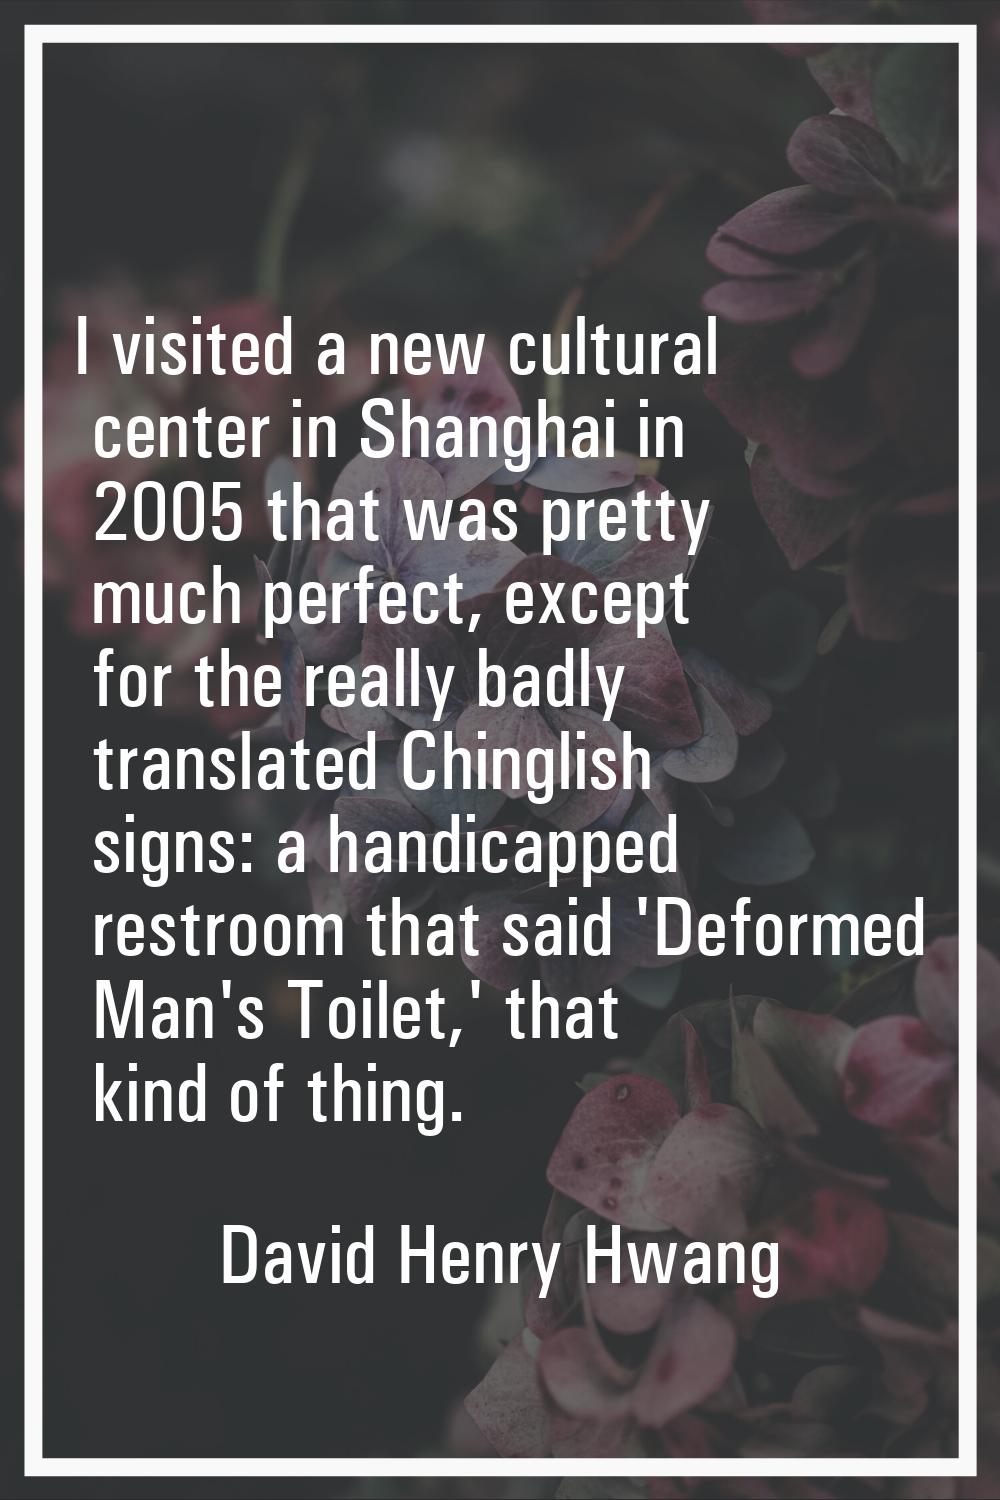 I visited a new cultural center in Shanghai in 2005 that was pretty much perfect, except for the re